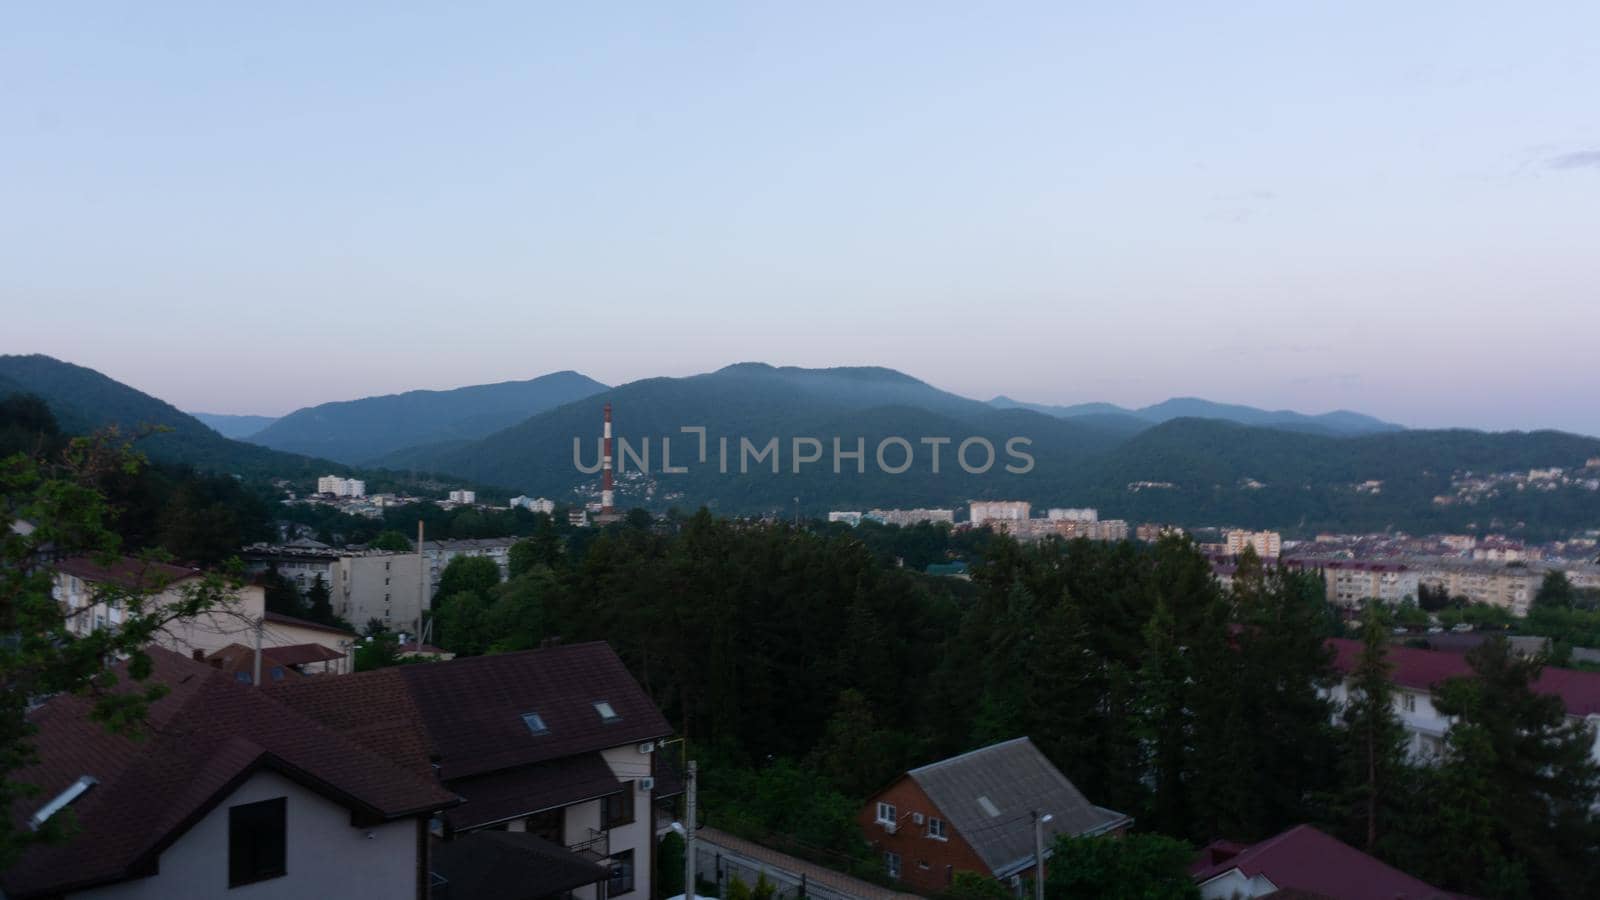 LAZAREVSKOE, SOCHI, RUSSIA - MAY, 27, 2021: Panorama of sunset in the mountains. A magical view of the sea and small town from the observation deck.